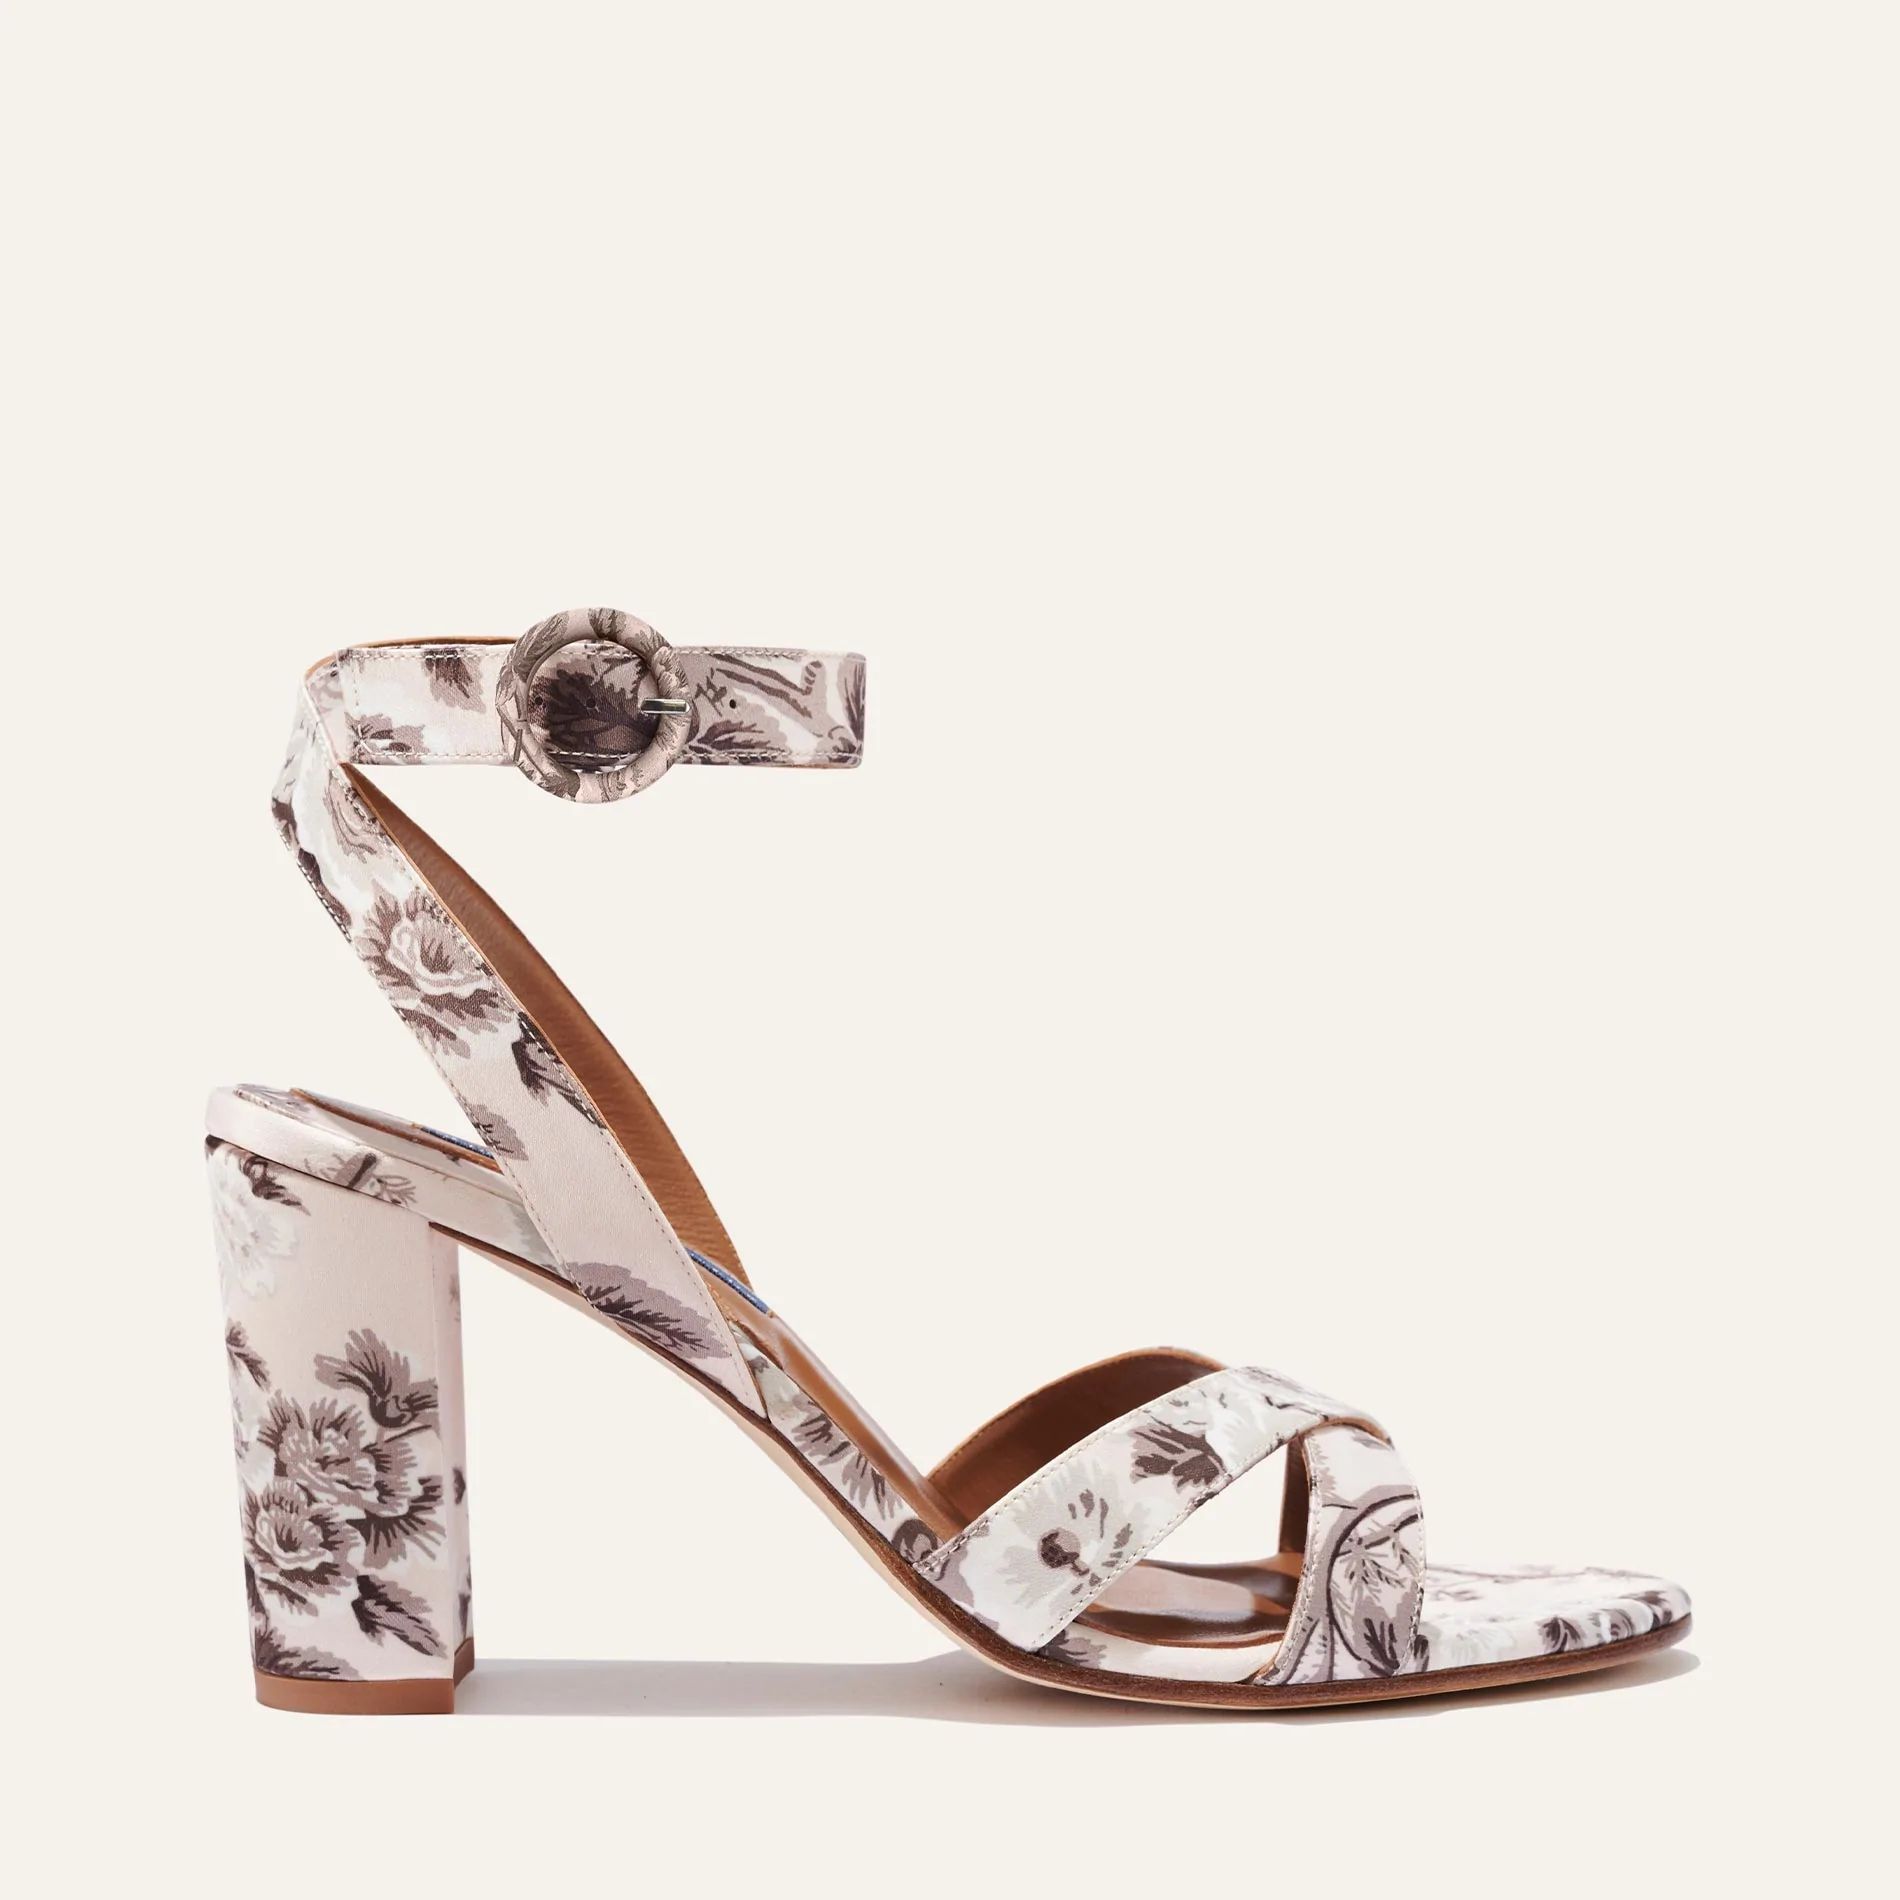 Archive Sale - The Uptown Sandal | Margaux